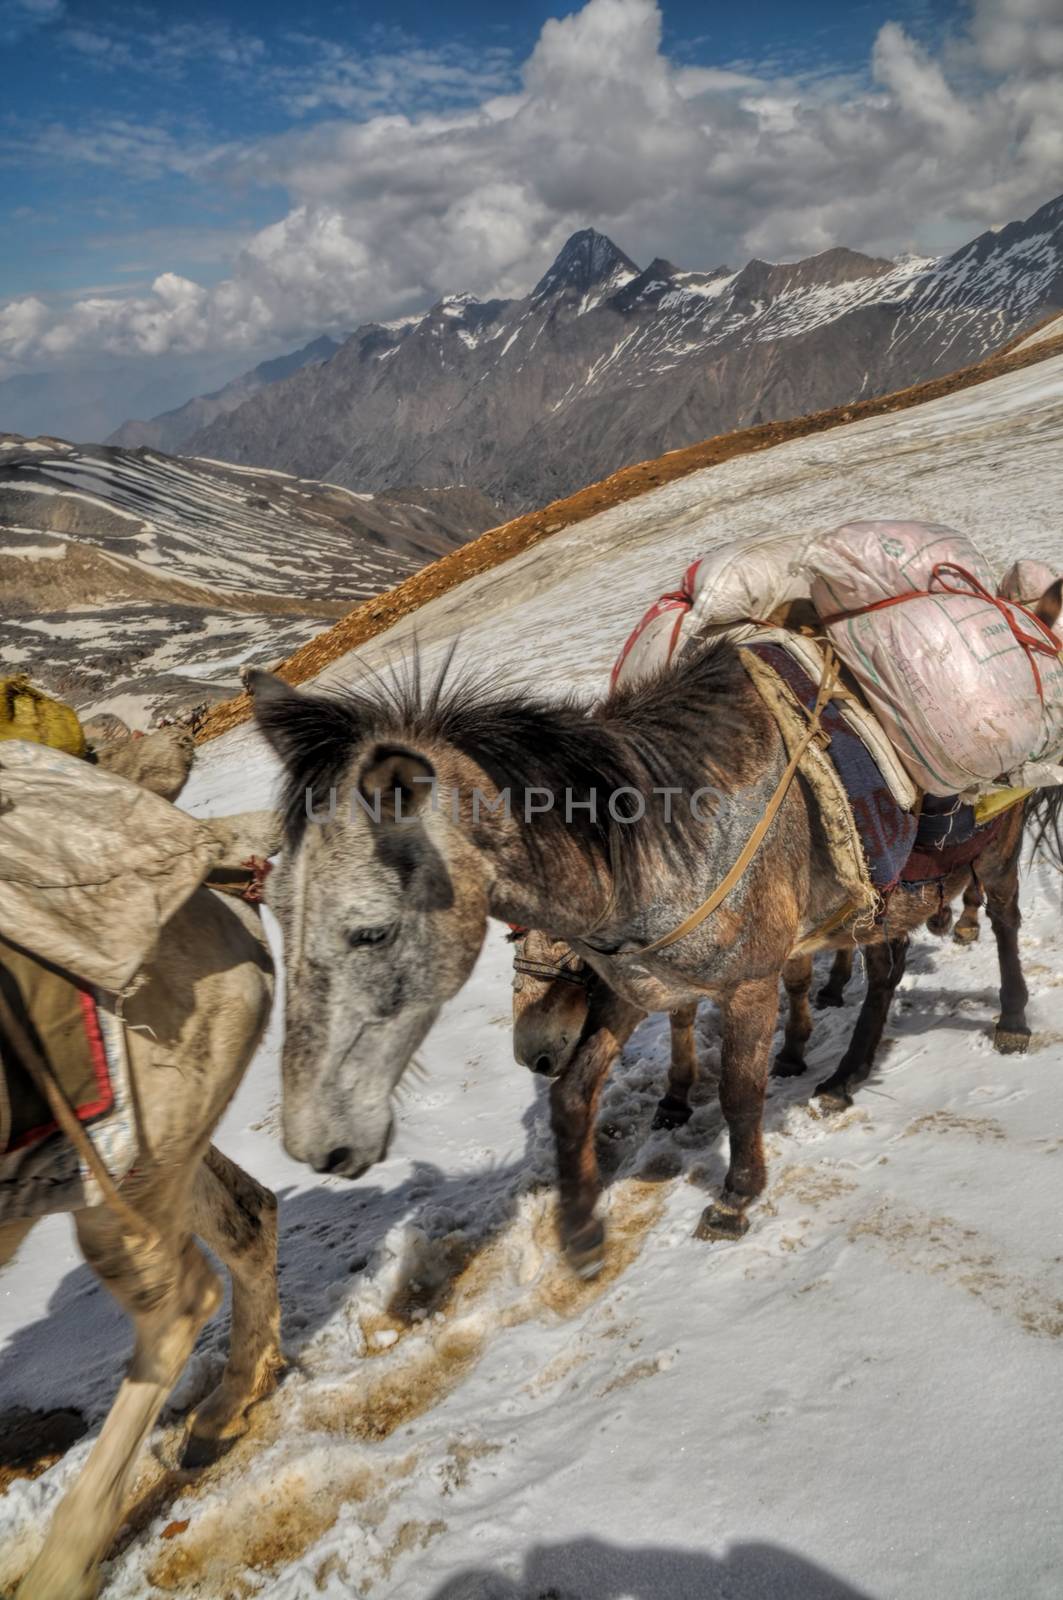 Mules in Himalayas by MichalKnitl